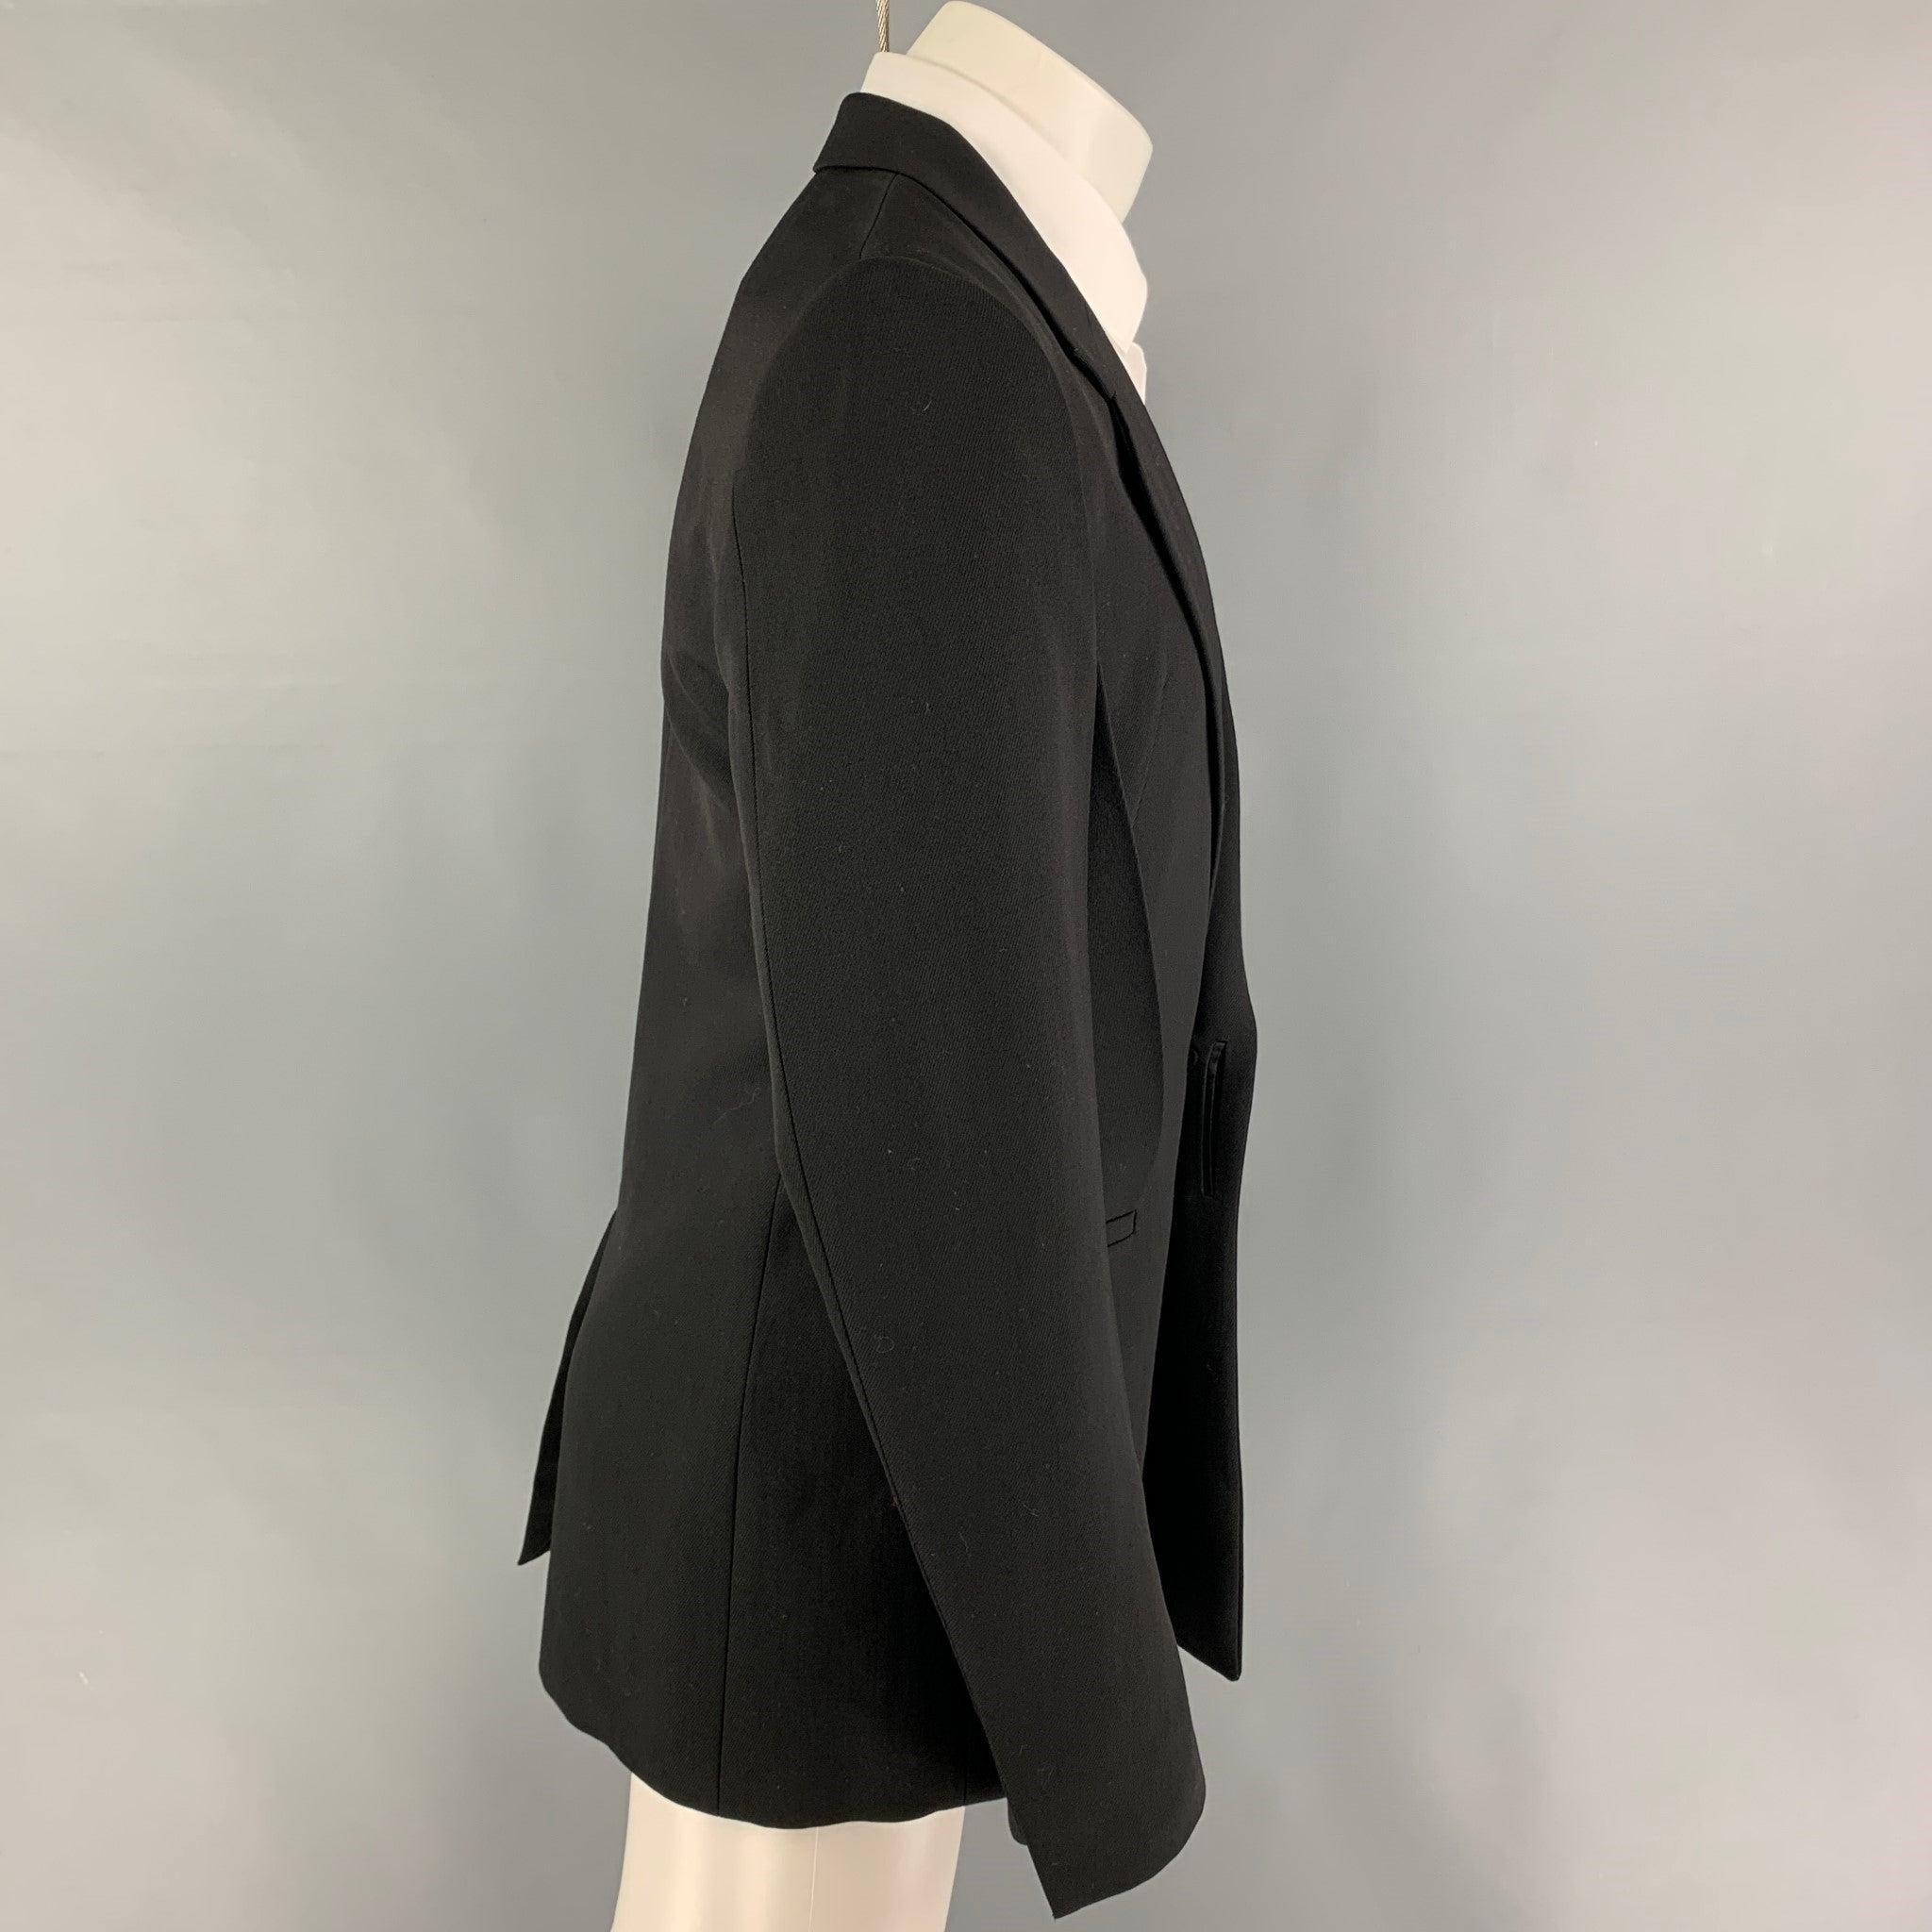 GIVENCHY sport coat comes in a black material with a full liner featuring a slim fit, notch lapel, two front pleats, slit pockets, single back vent, and a single button closure.
Very Good
Pre-Owned Condition. Fabric tag removed.  

Marked:   Size